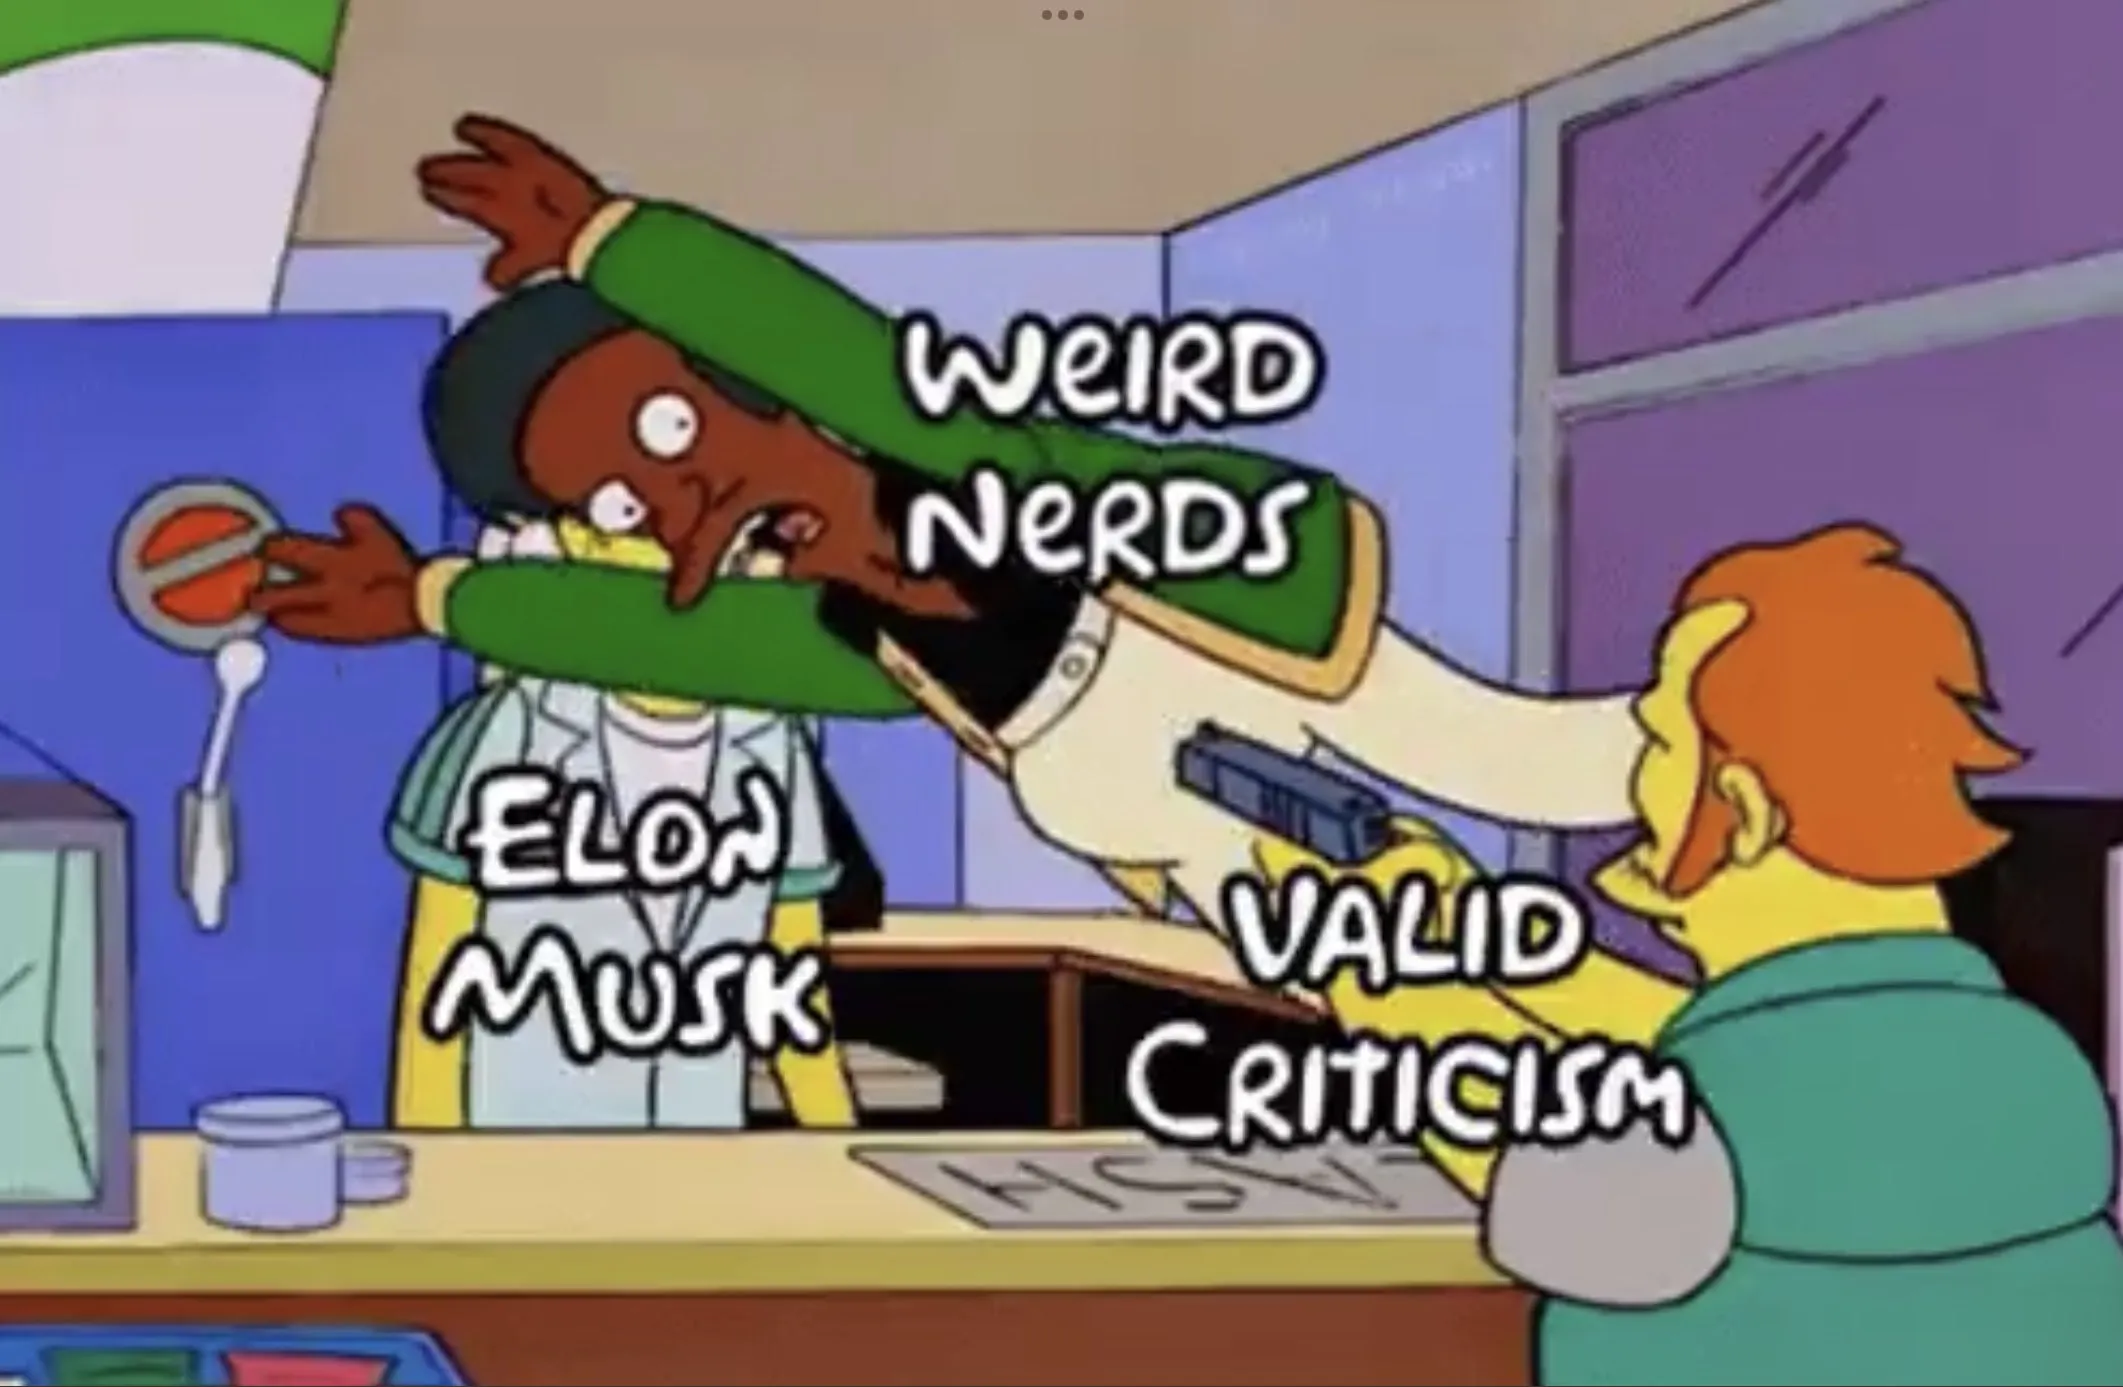 Apu jumping in front of a gun to shield James Wood from a robber's gun in that a scene from the Simpsons.